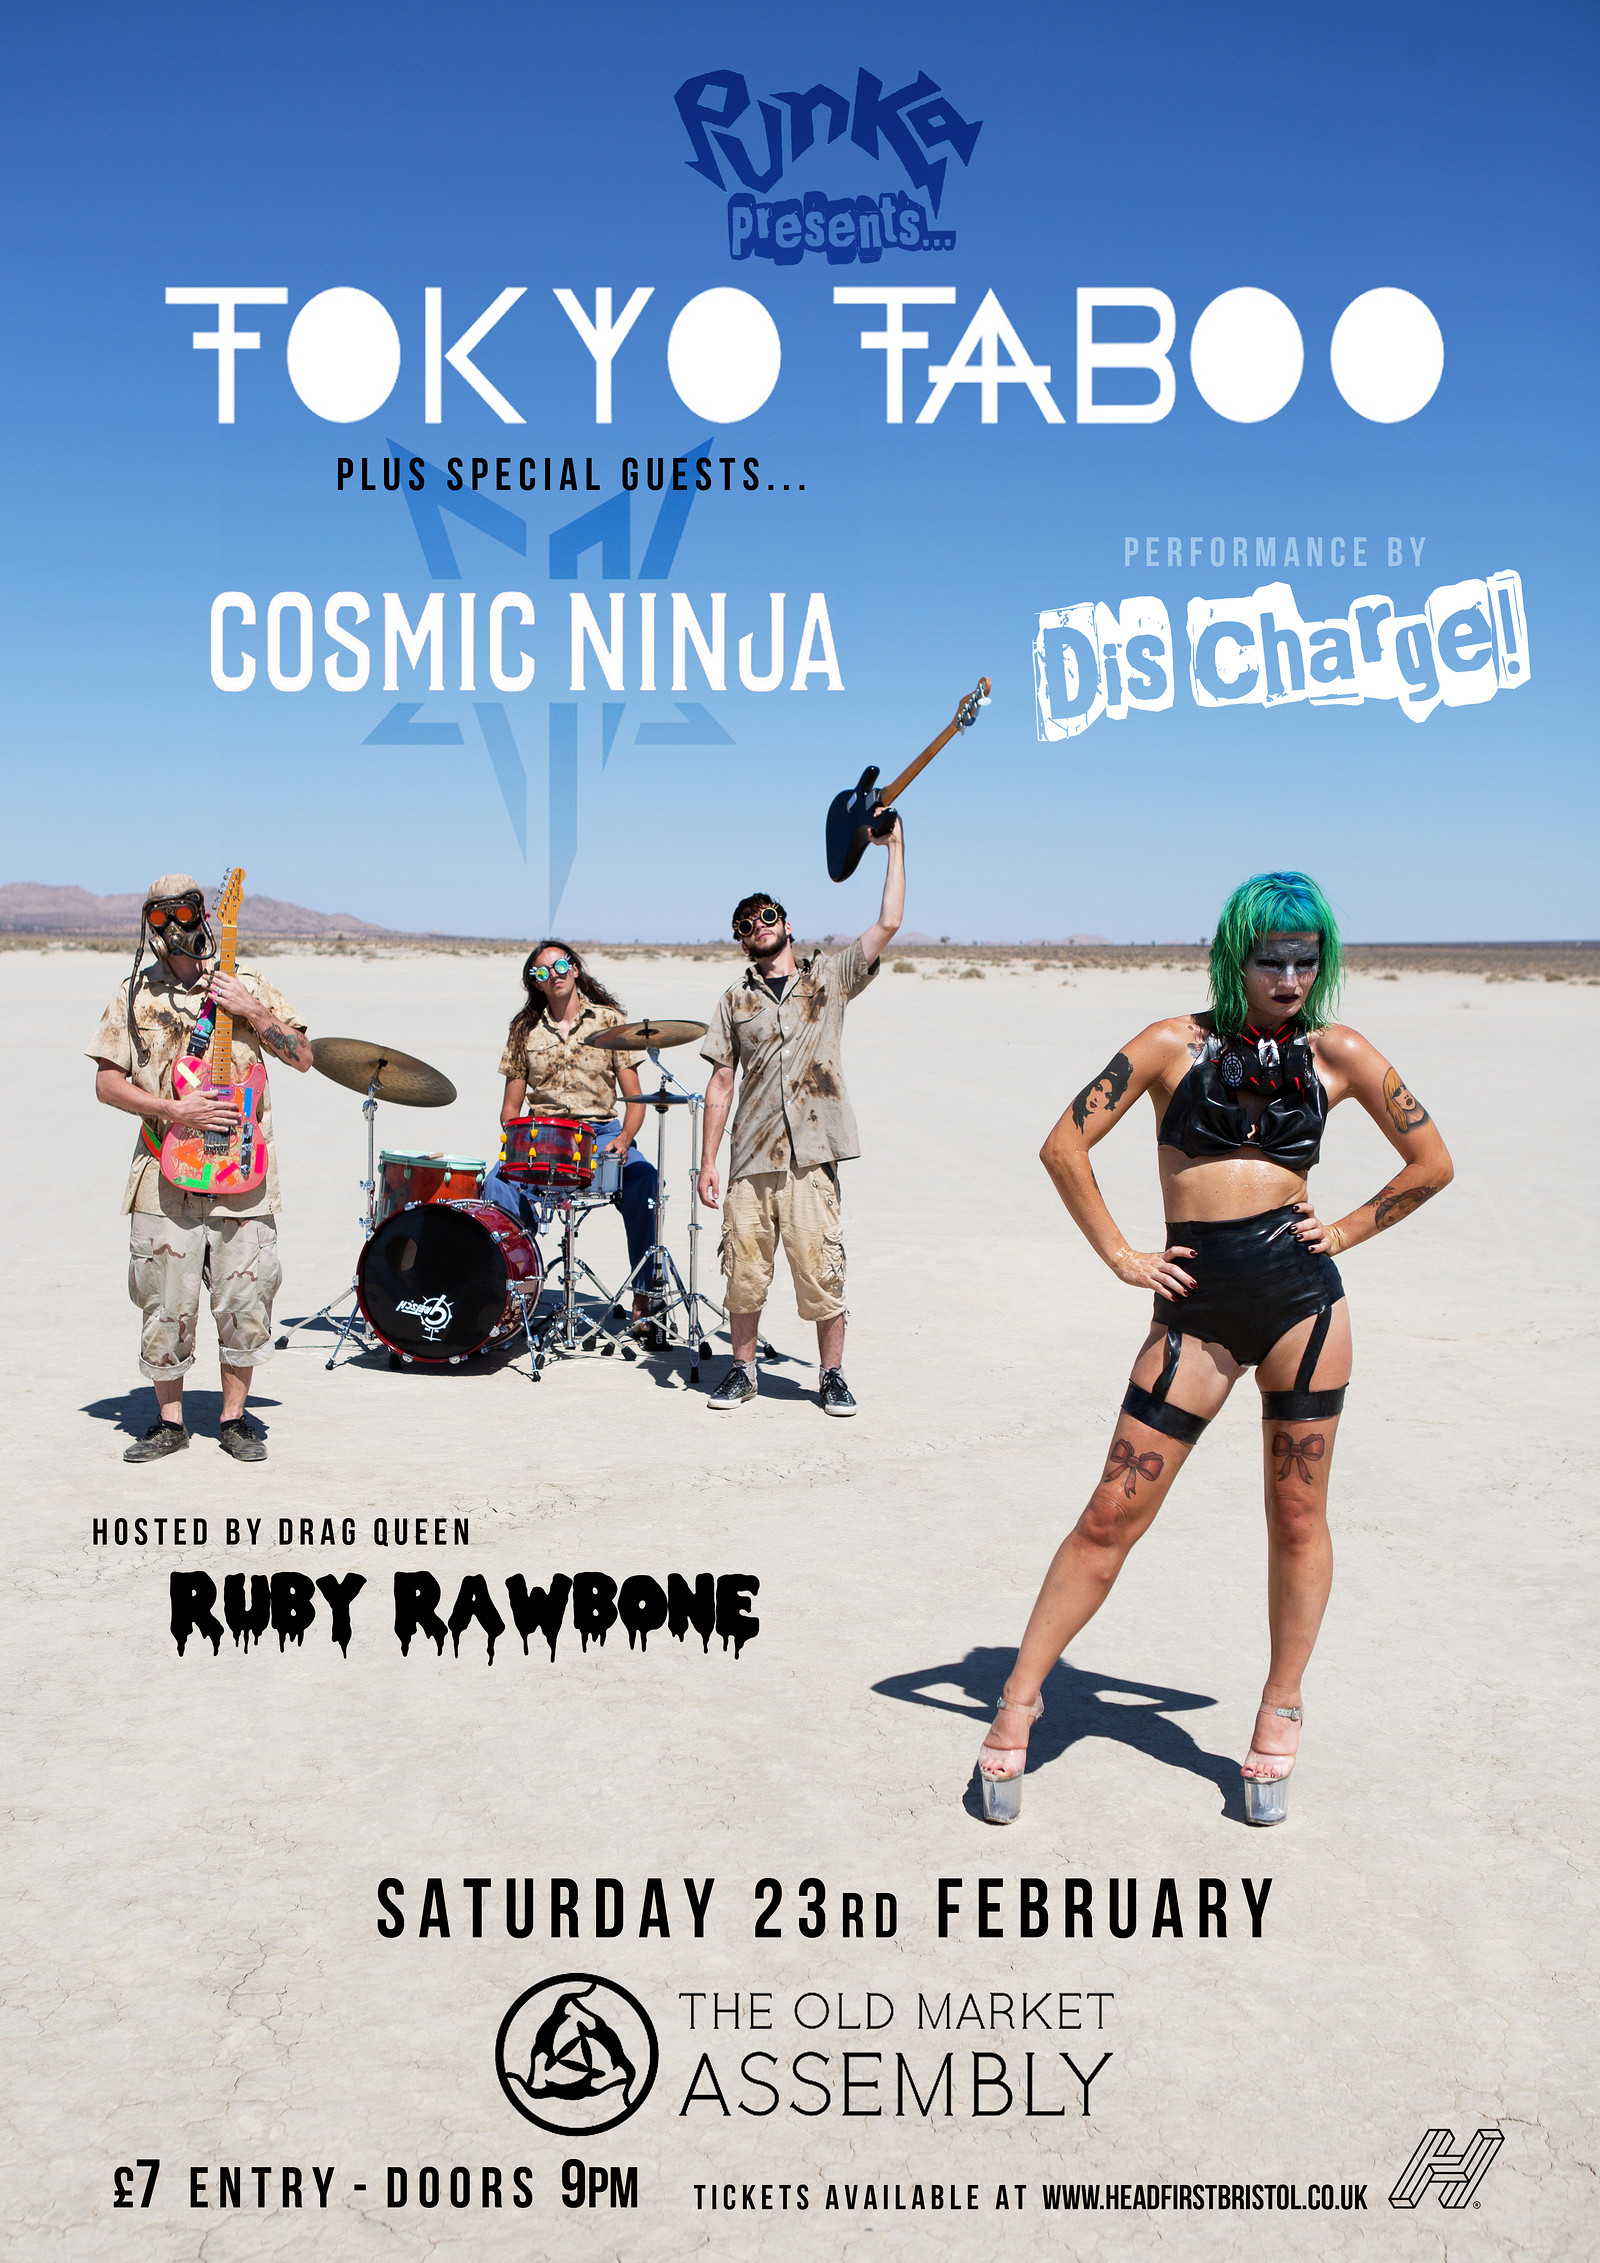 Tokyo Taboo, Cosmic Ninja & guests at The Old Market Assembly